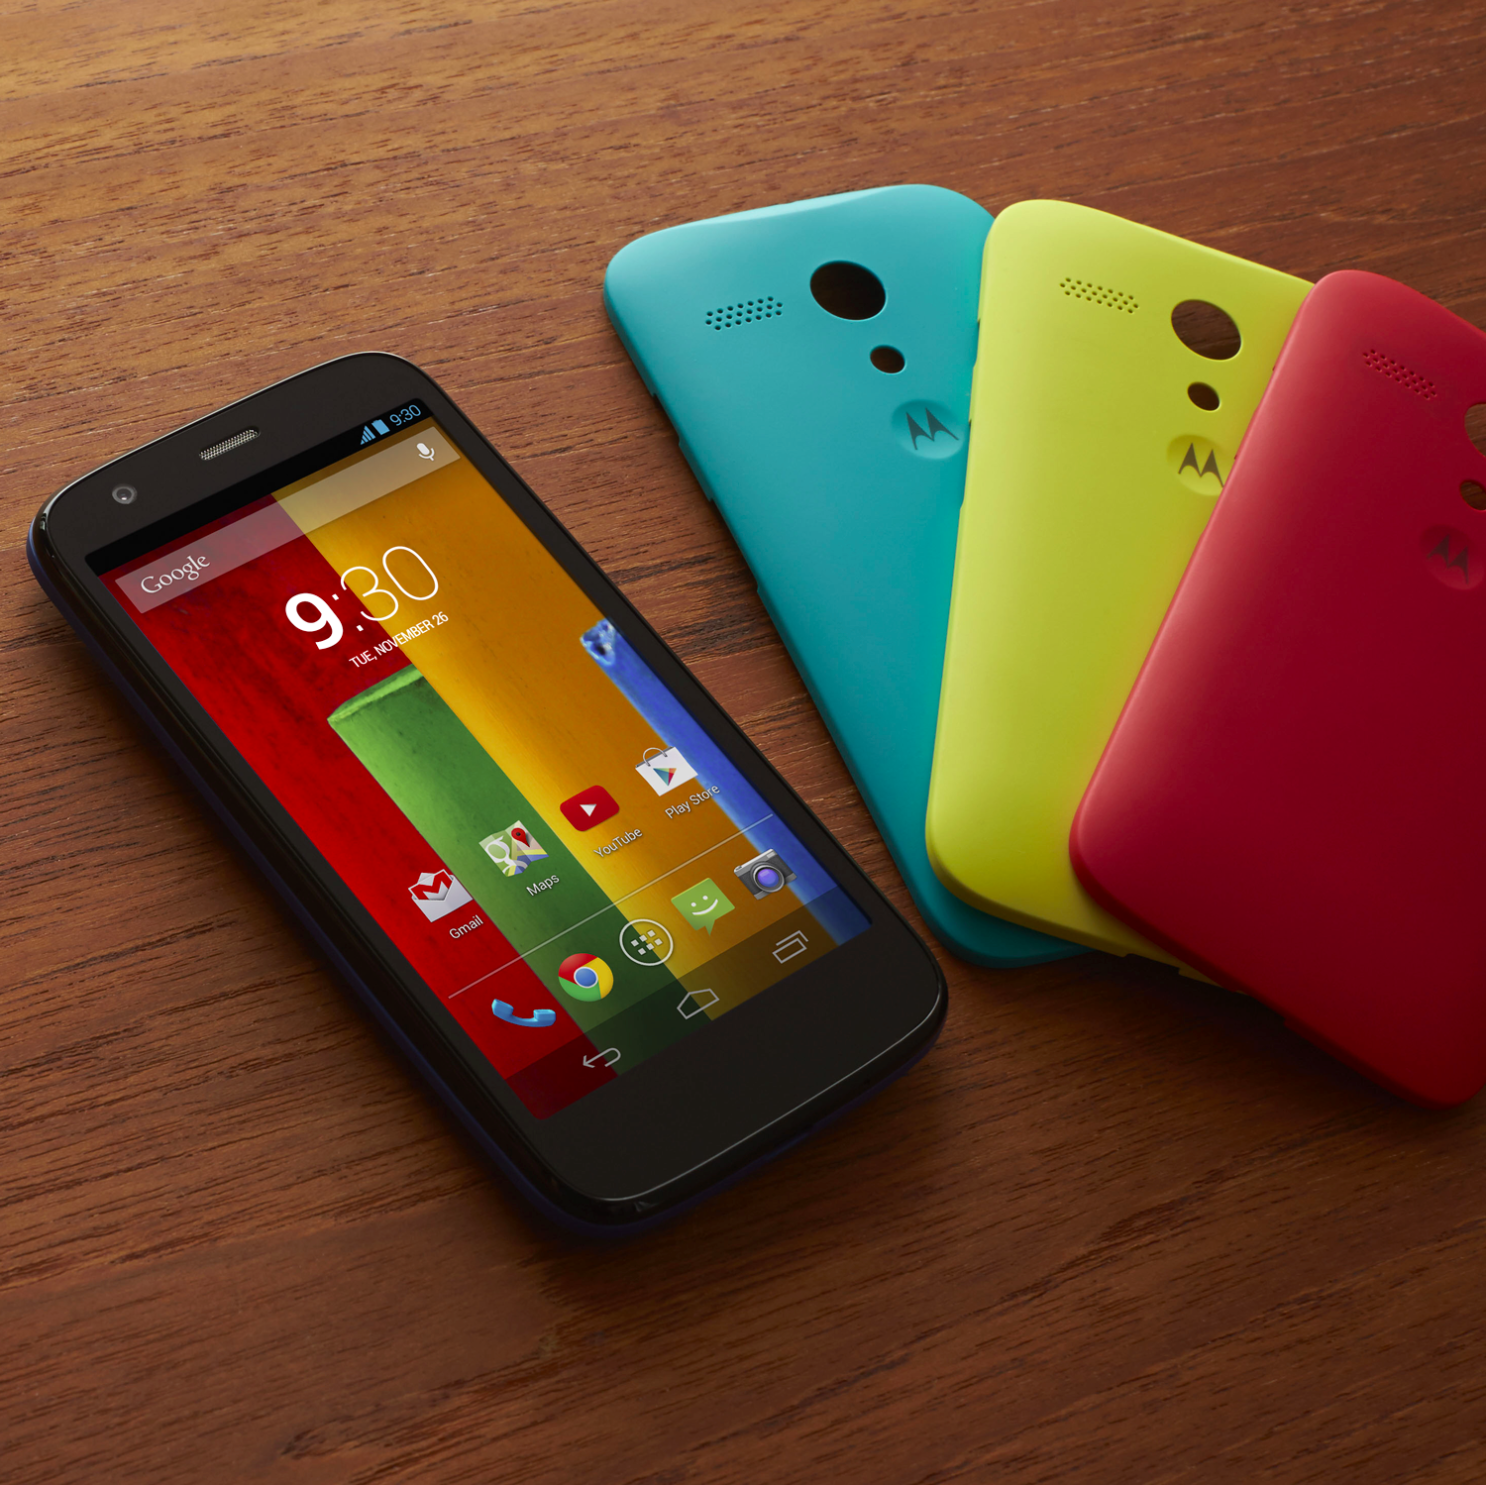 Best Buy Selling No Contract Motorola Moto G For Verizon For 99 99 Los Angeles Times